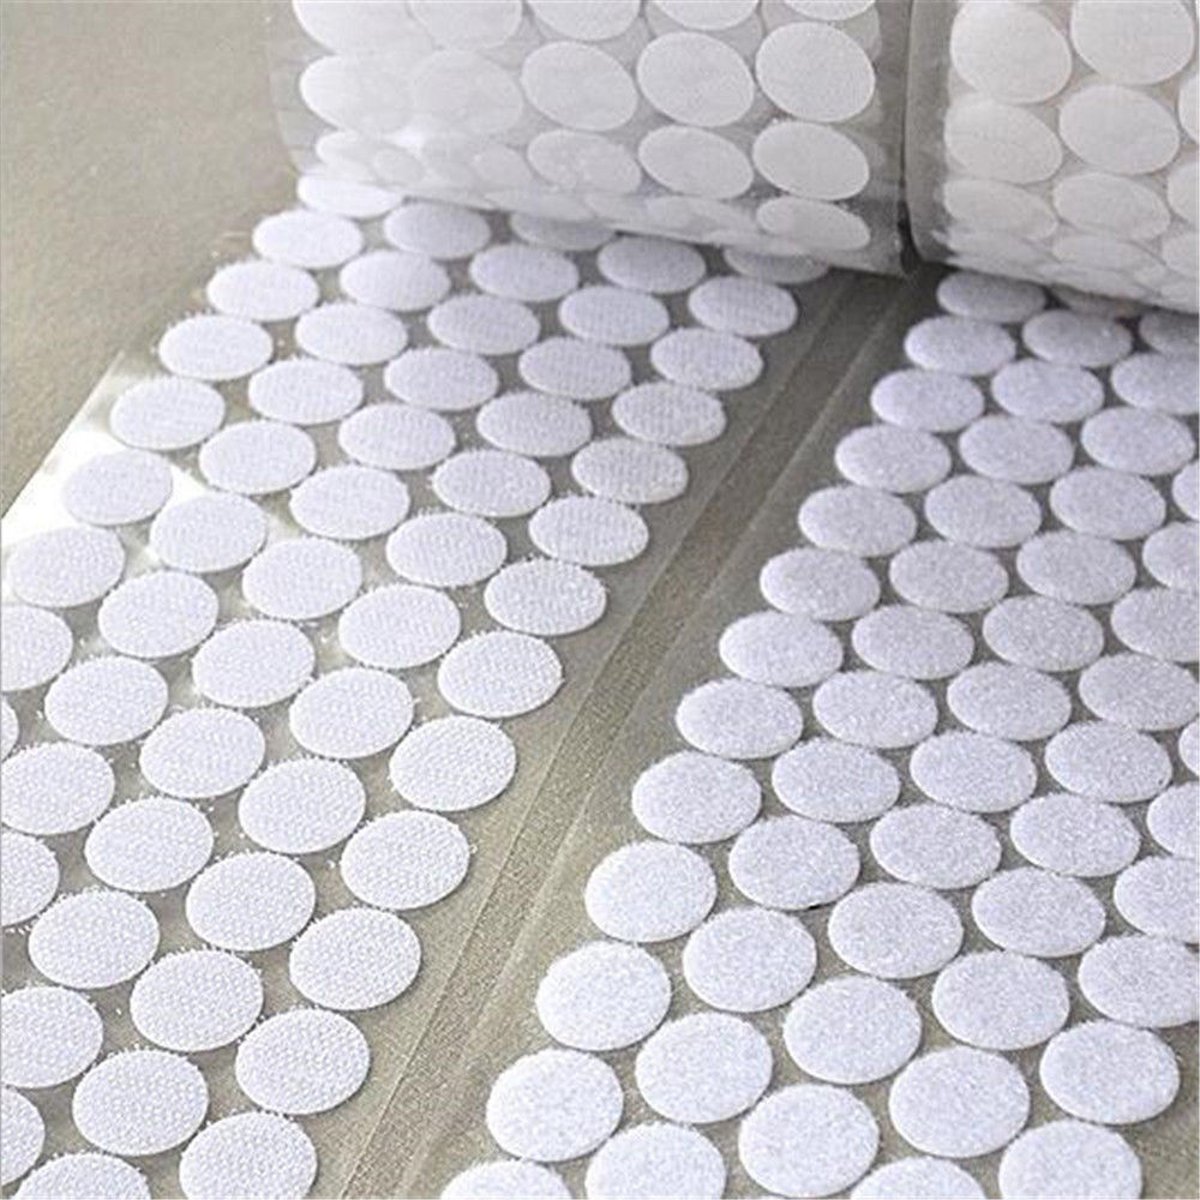 1000PCS-Round-Coins-Dots-Self-Adhesive-Coin-Hook-Loop-Sticker-Tape-Discs-Circle-1332369